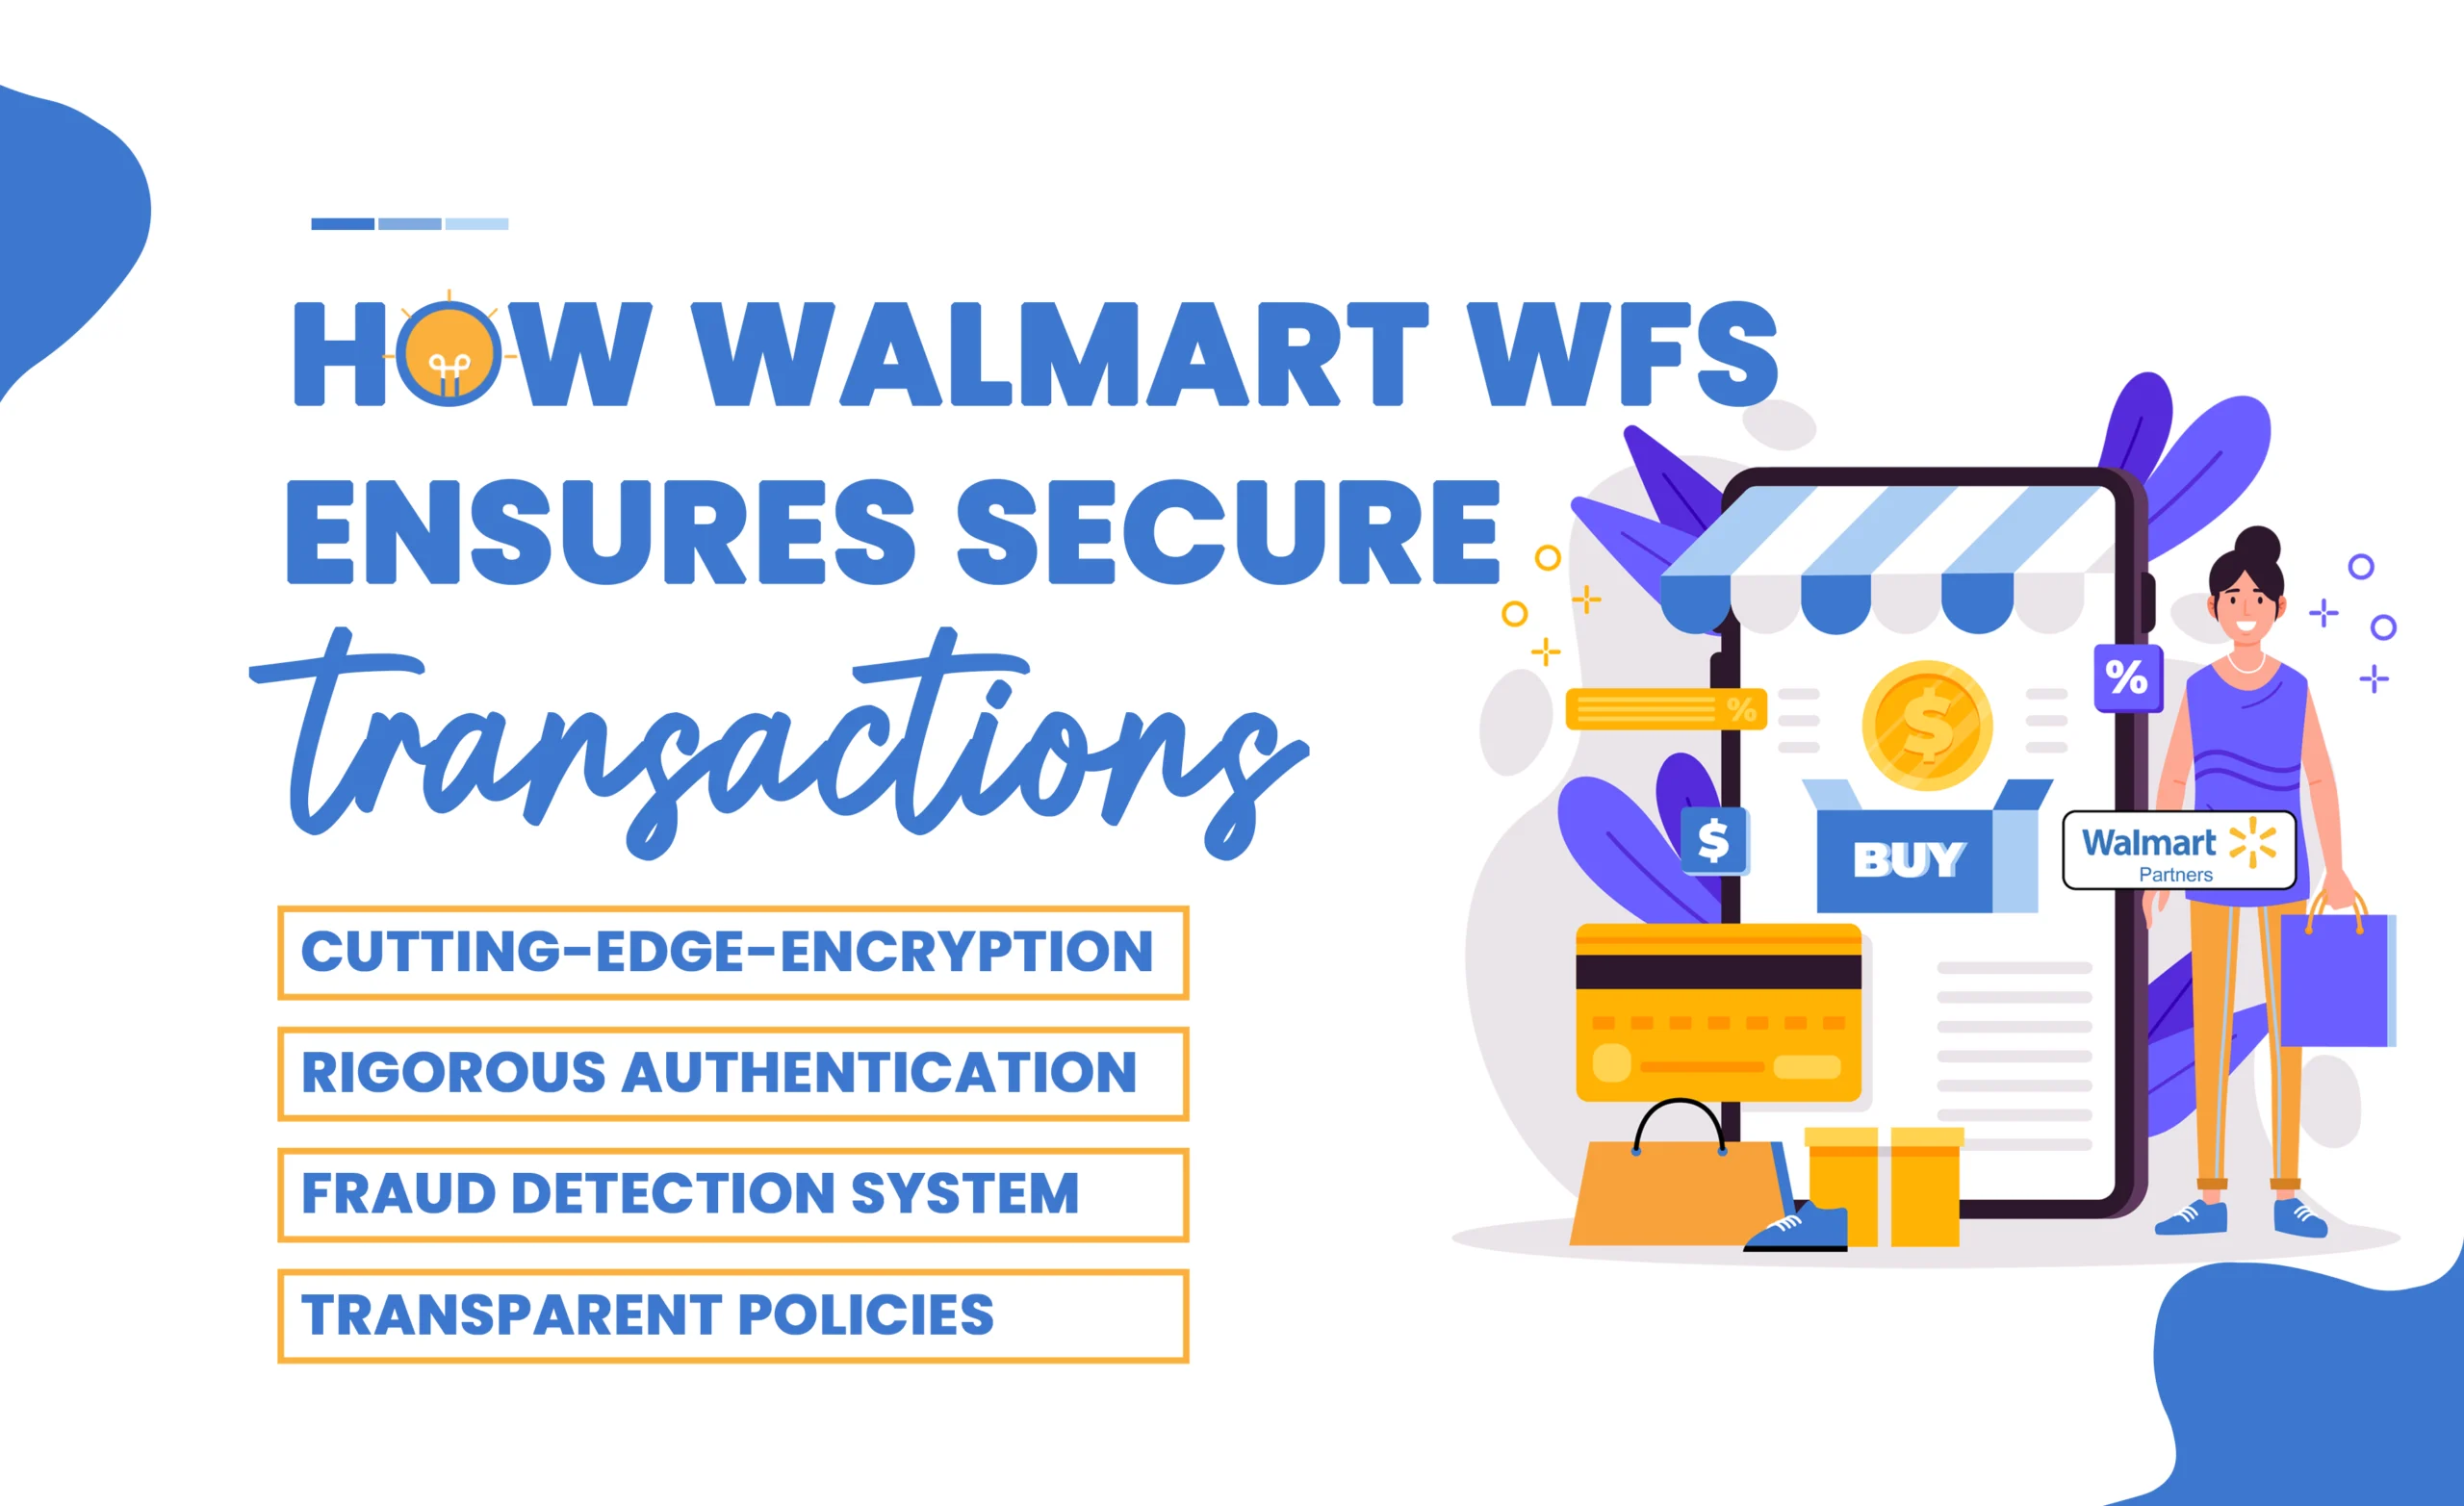 Building Trust with Walmart WFS, Ensuring Secure Transactions